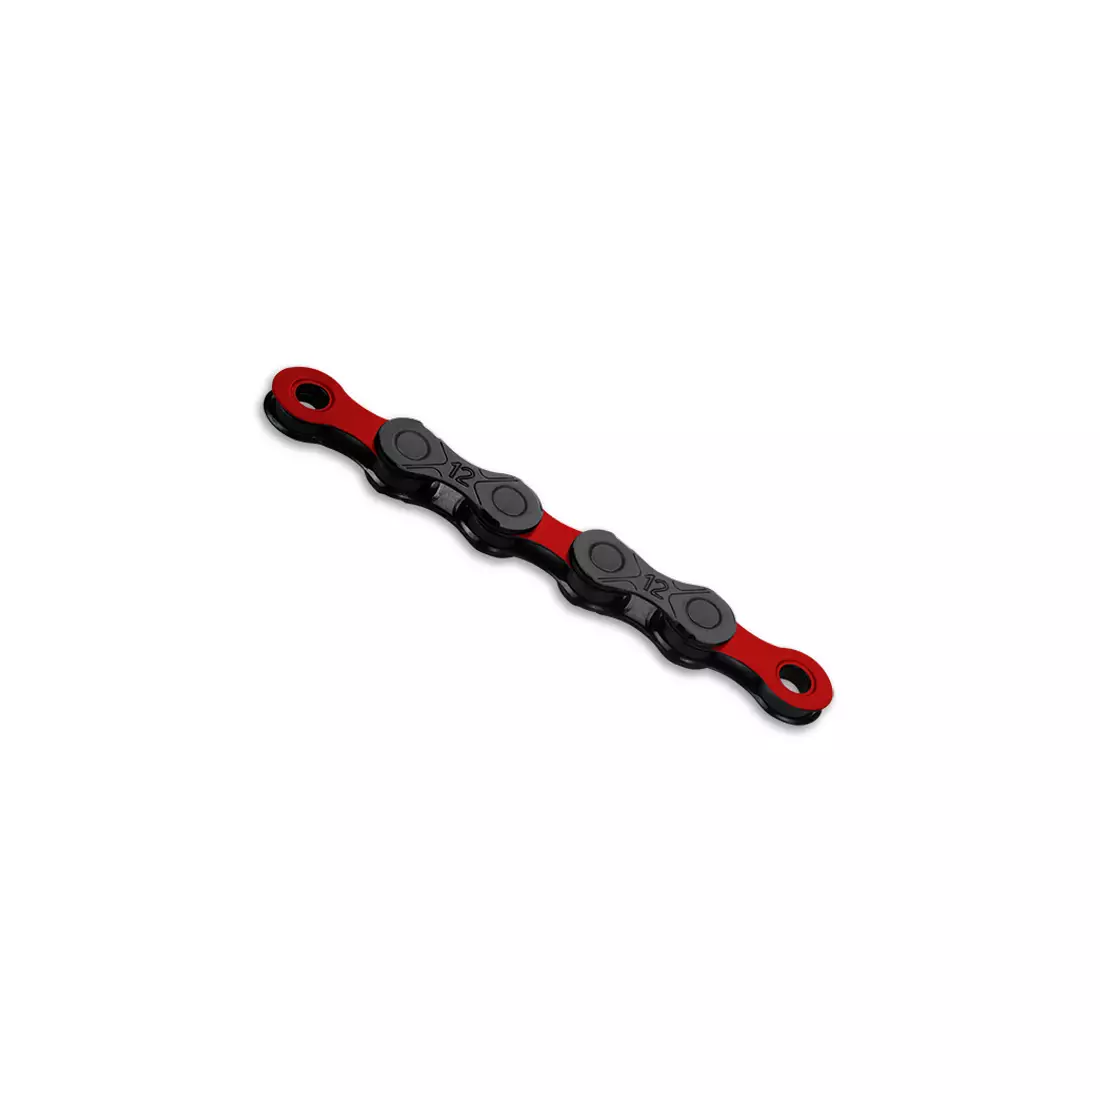 KMC DLC Bicycle chain 12-speed E-bike 126 links, black and red